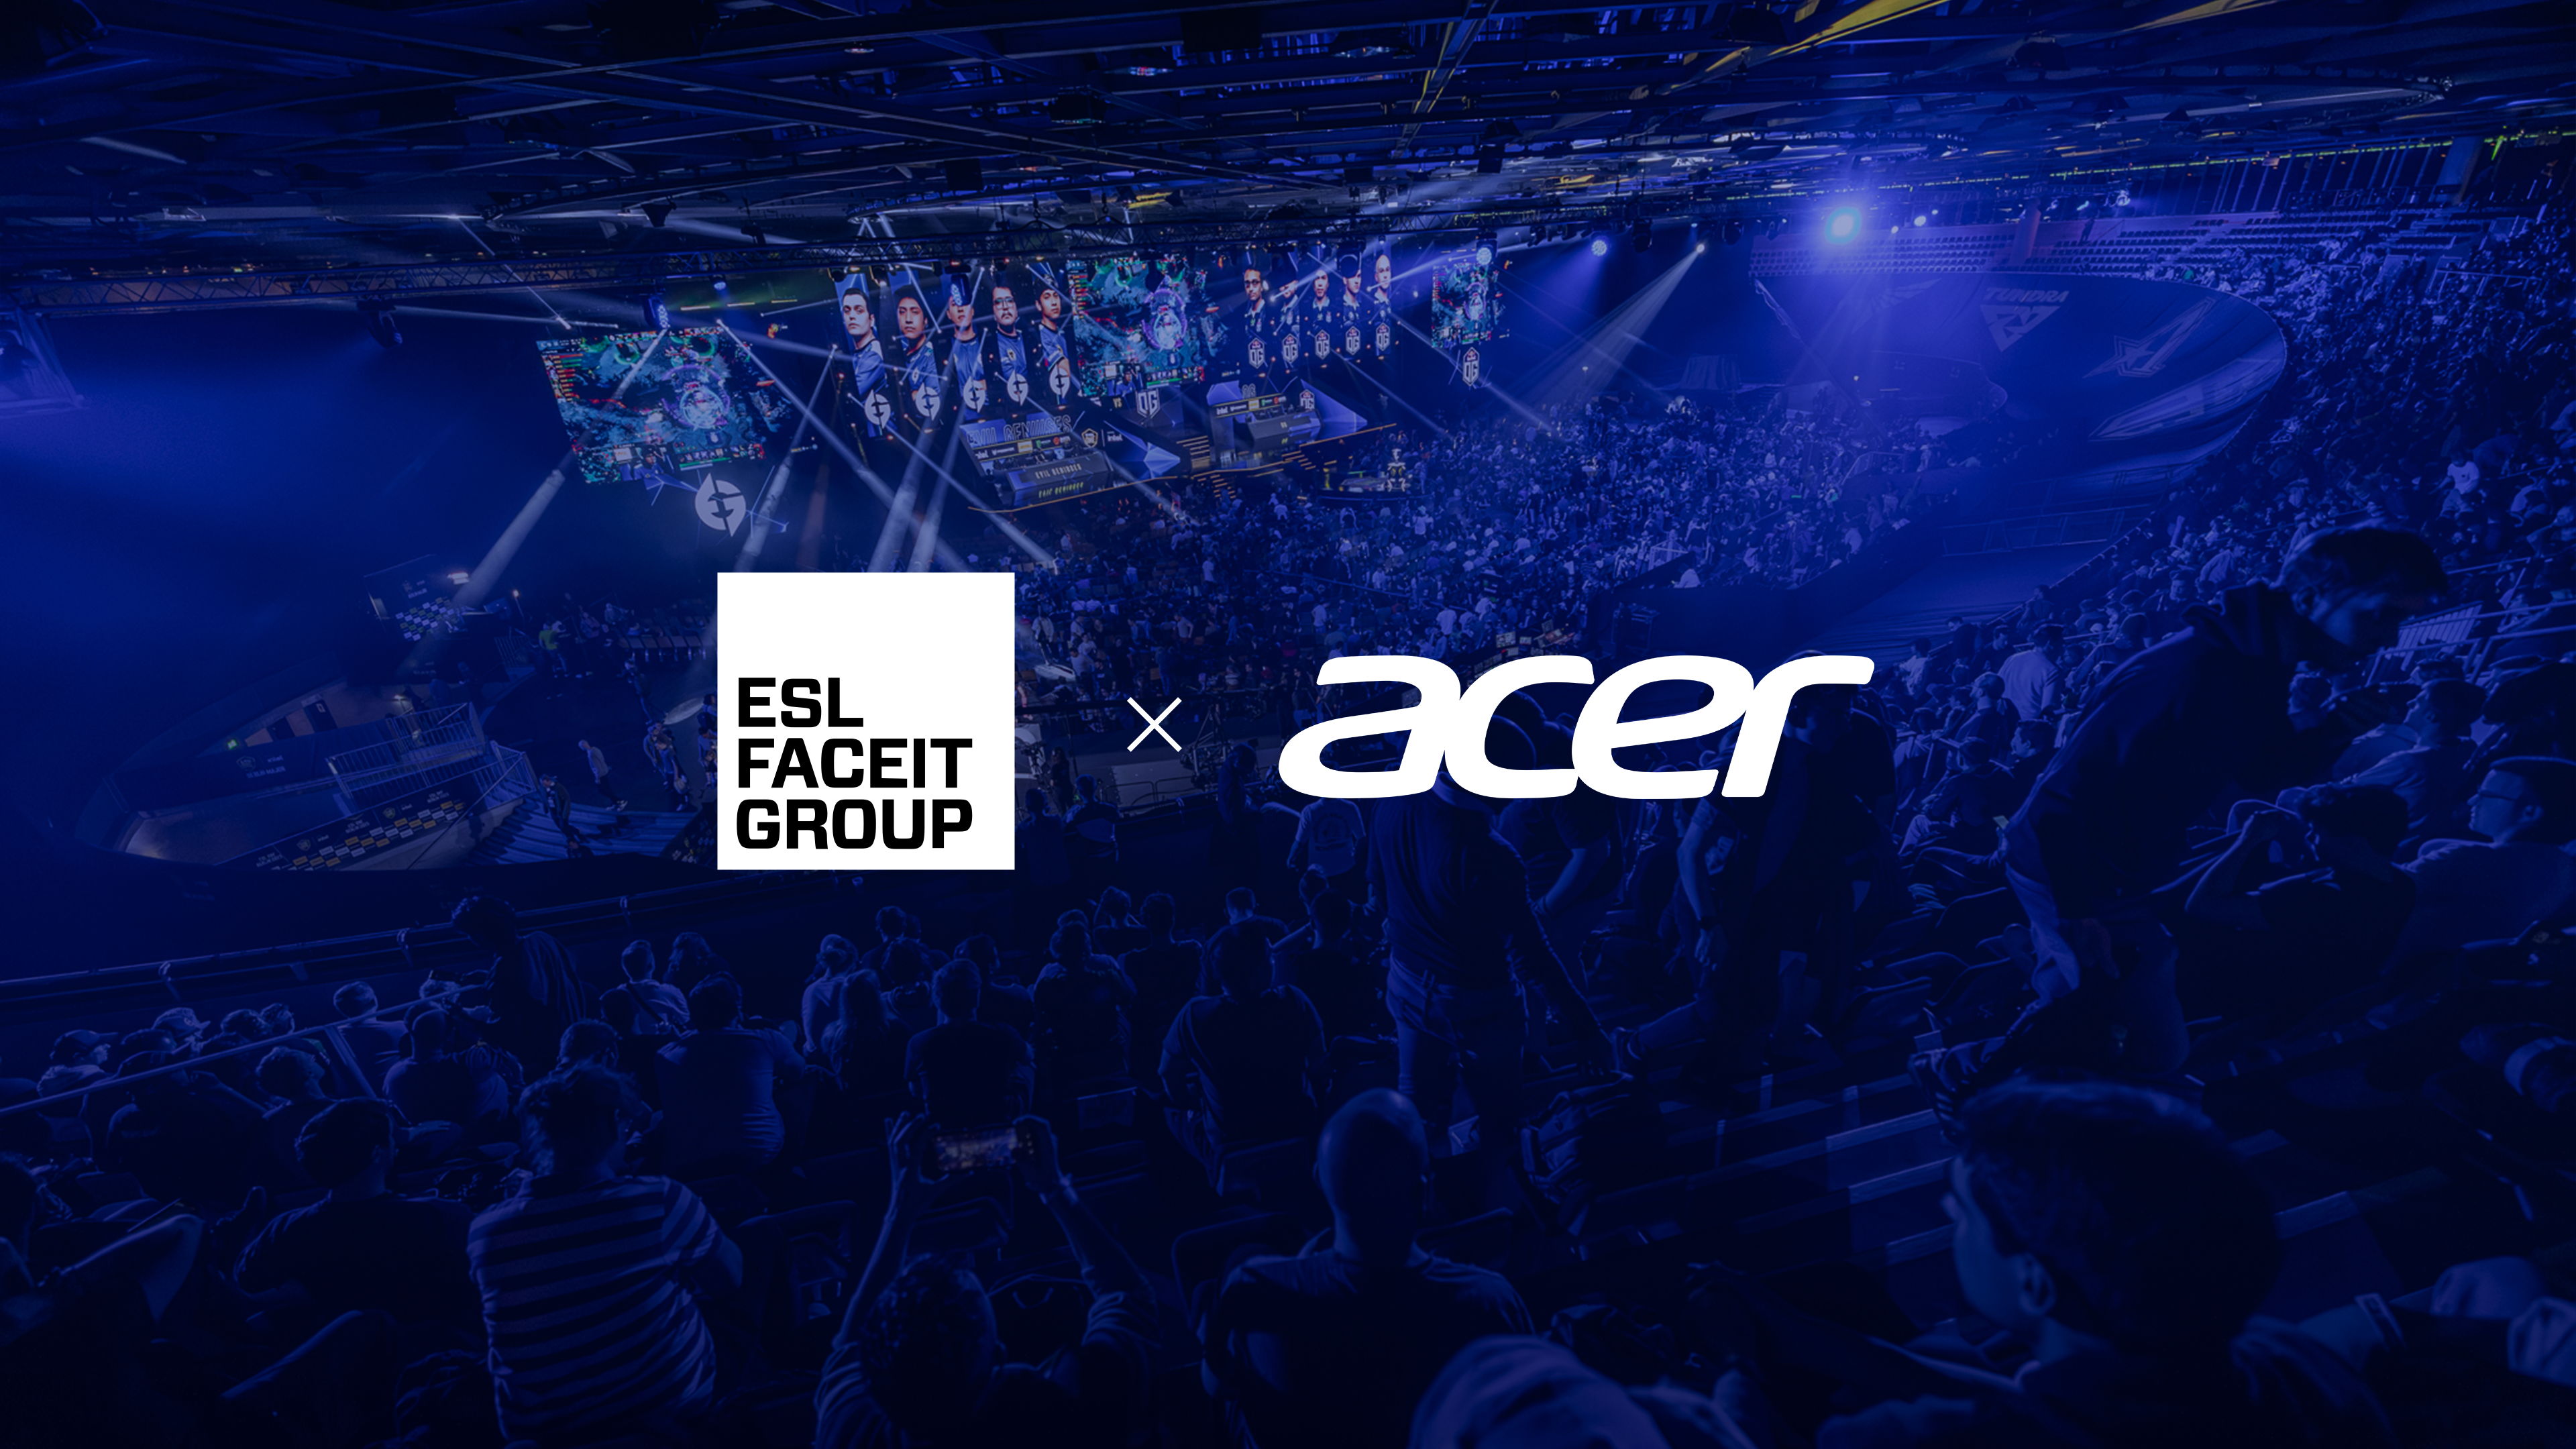 ESL FACEIT Group, Intel® and Acer Expand Strategic Partnership Across Premier Counter-Strike and Dota 2 Competitions